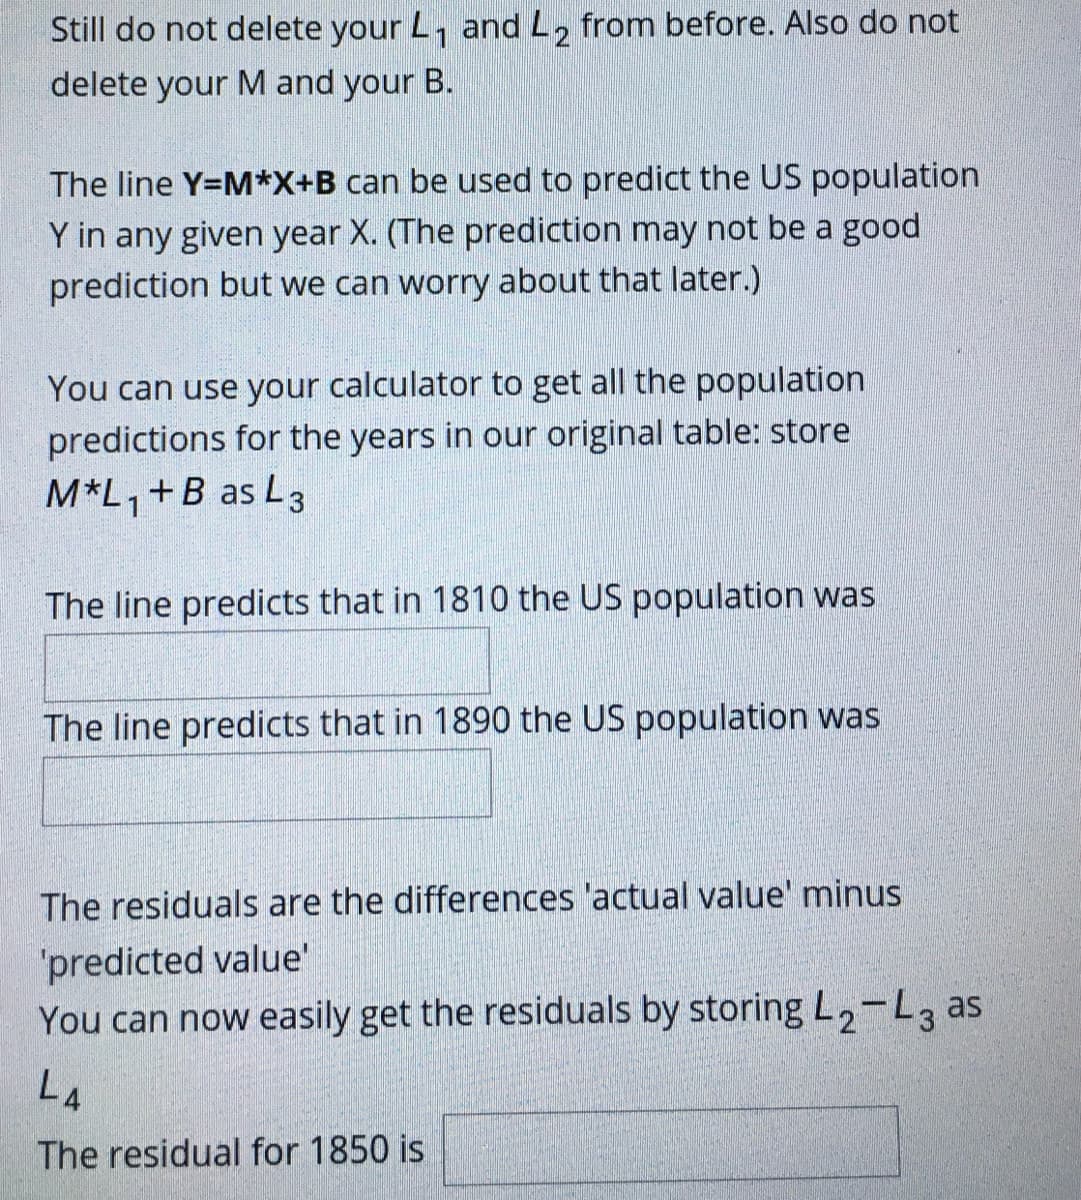 Still do not delete your L, and L, from before. Also do not
delete your M and your B.
The line Y=M*X+B can be used to predict the US population
Y in any given year X. (The prediction may not be a good
prediction but we can worry about that later.)
You can use your calculator to get all the population
predictions for the years in our original table: store
M*L,+B as L3
The line predicts that in 1810 the US population was
The line predicts that in 1890 the US population was
The residuals are the differences 'actual value' minus
'predicted value'
You can now easily get the residuals by storing L,-L3 as
L4
The residual for 1850 is
